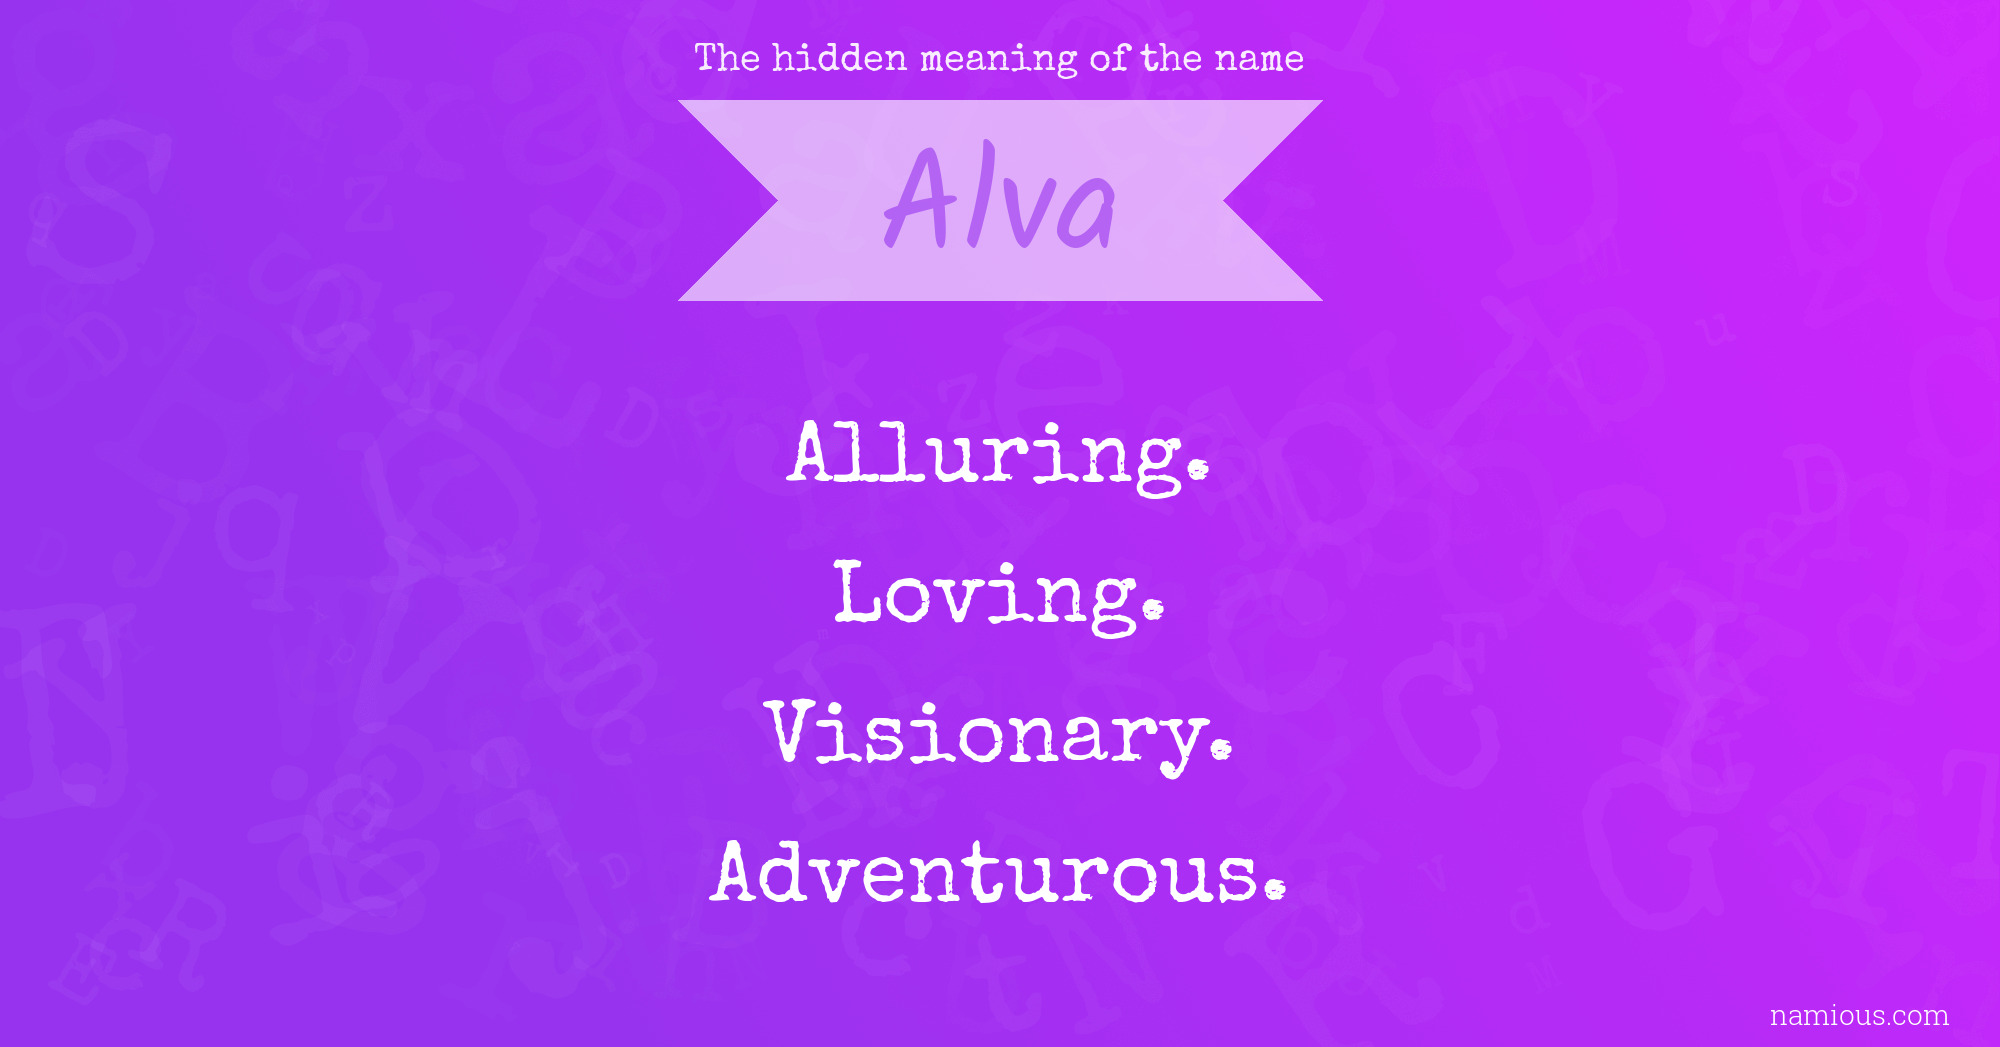 The hidden meaning of the name Alva